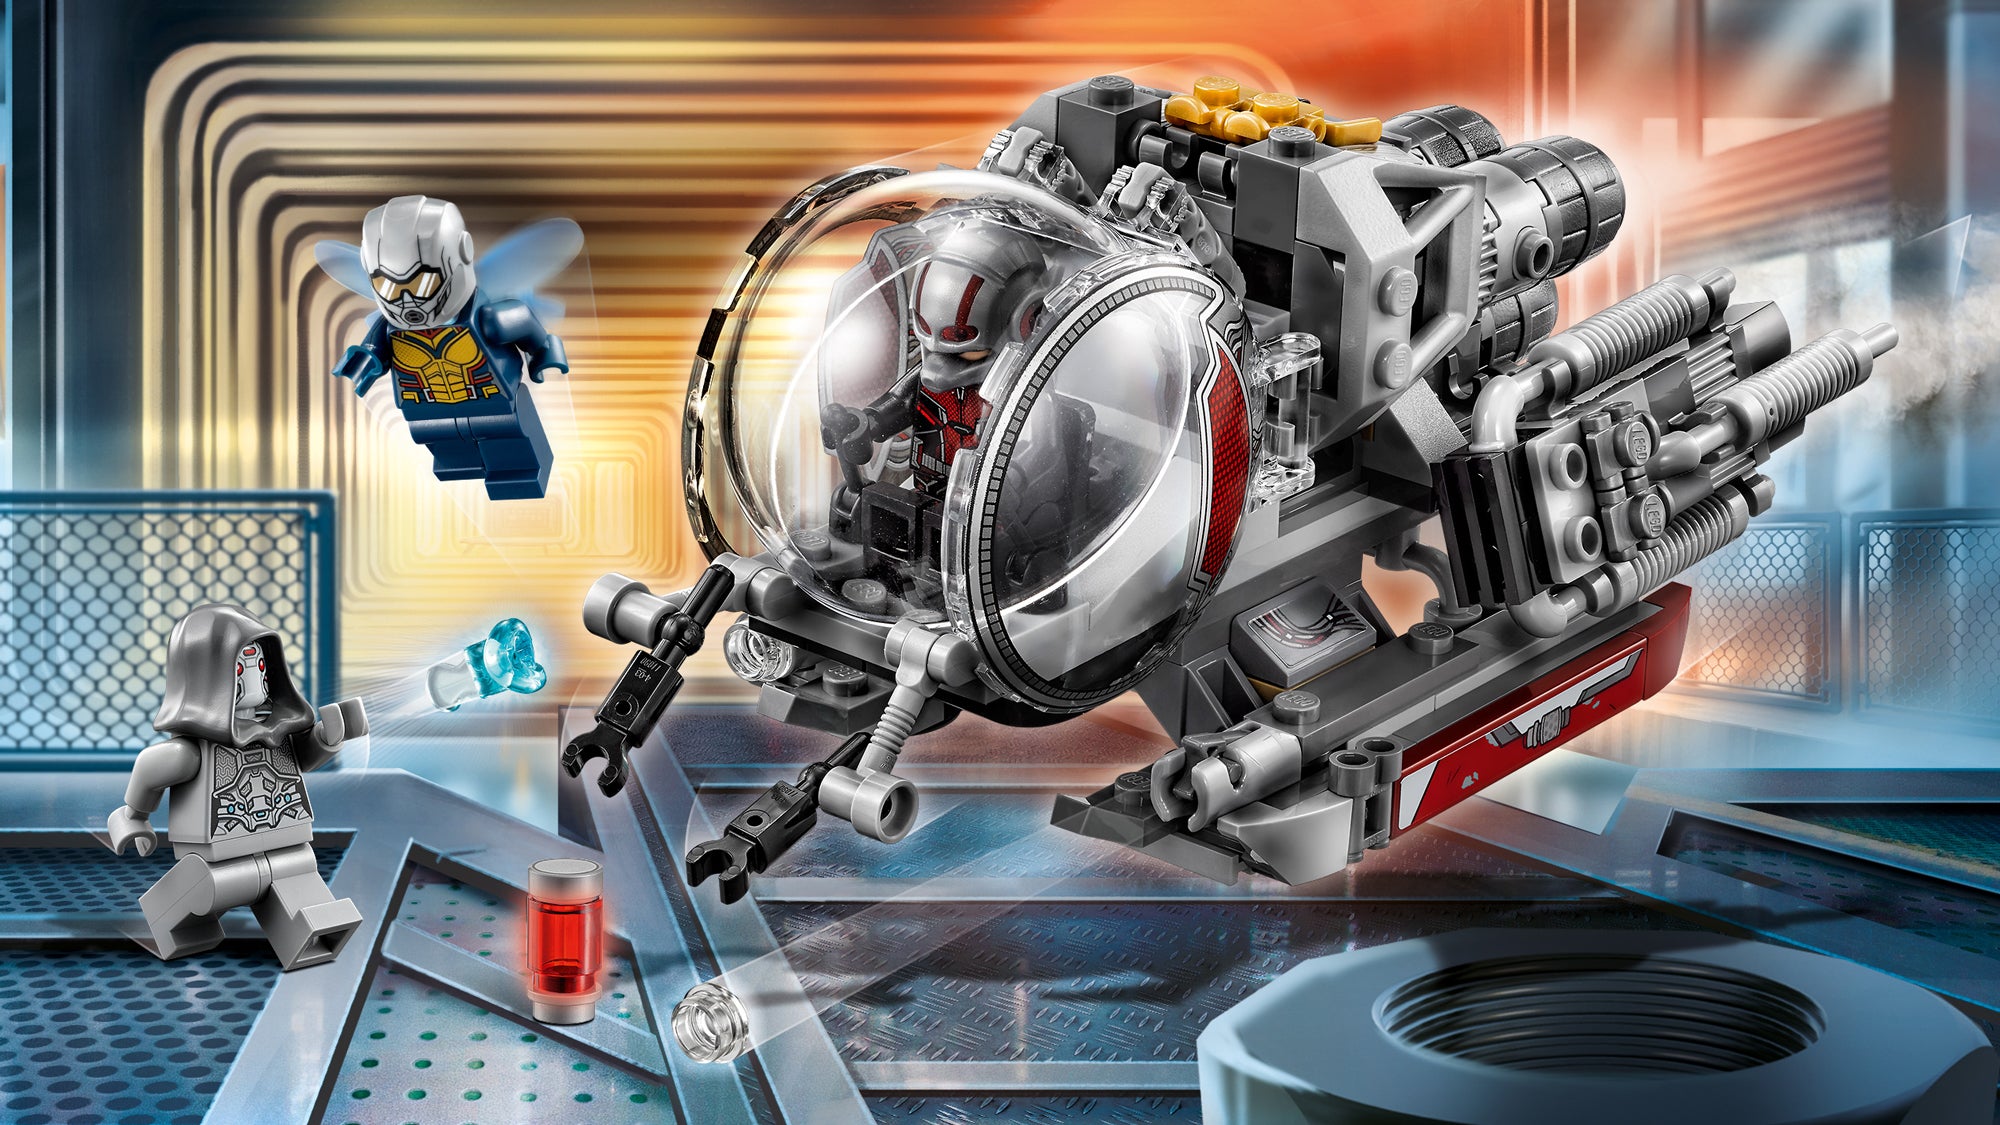 Ant-Man And The Wasp Gets A Snazzy LEGO Set, And More Of The Most ...